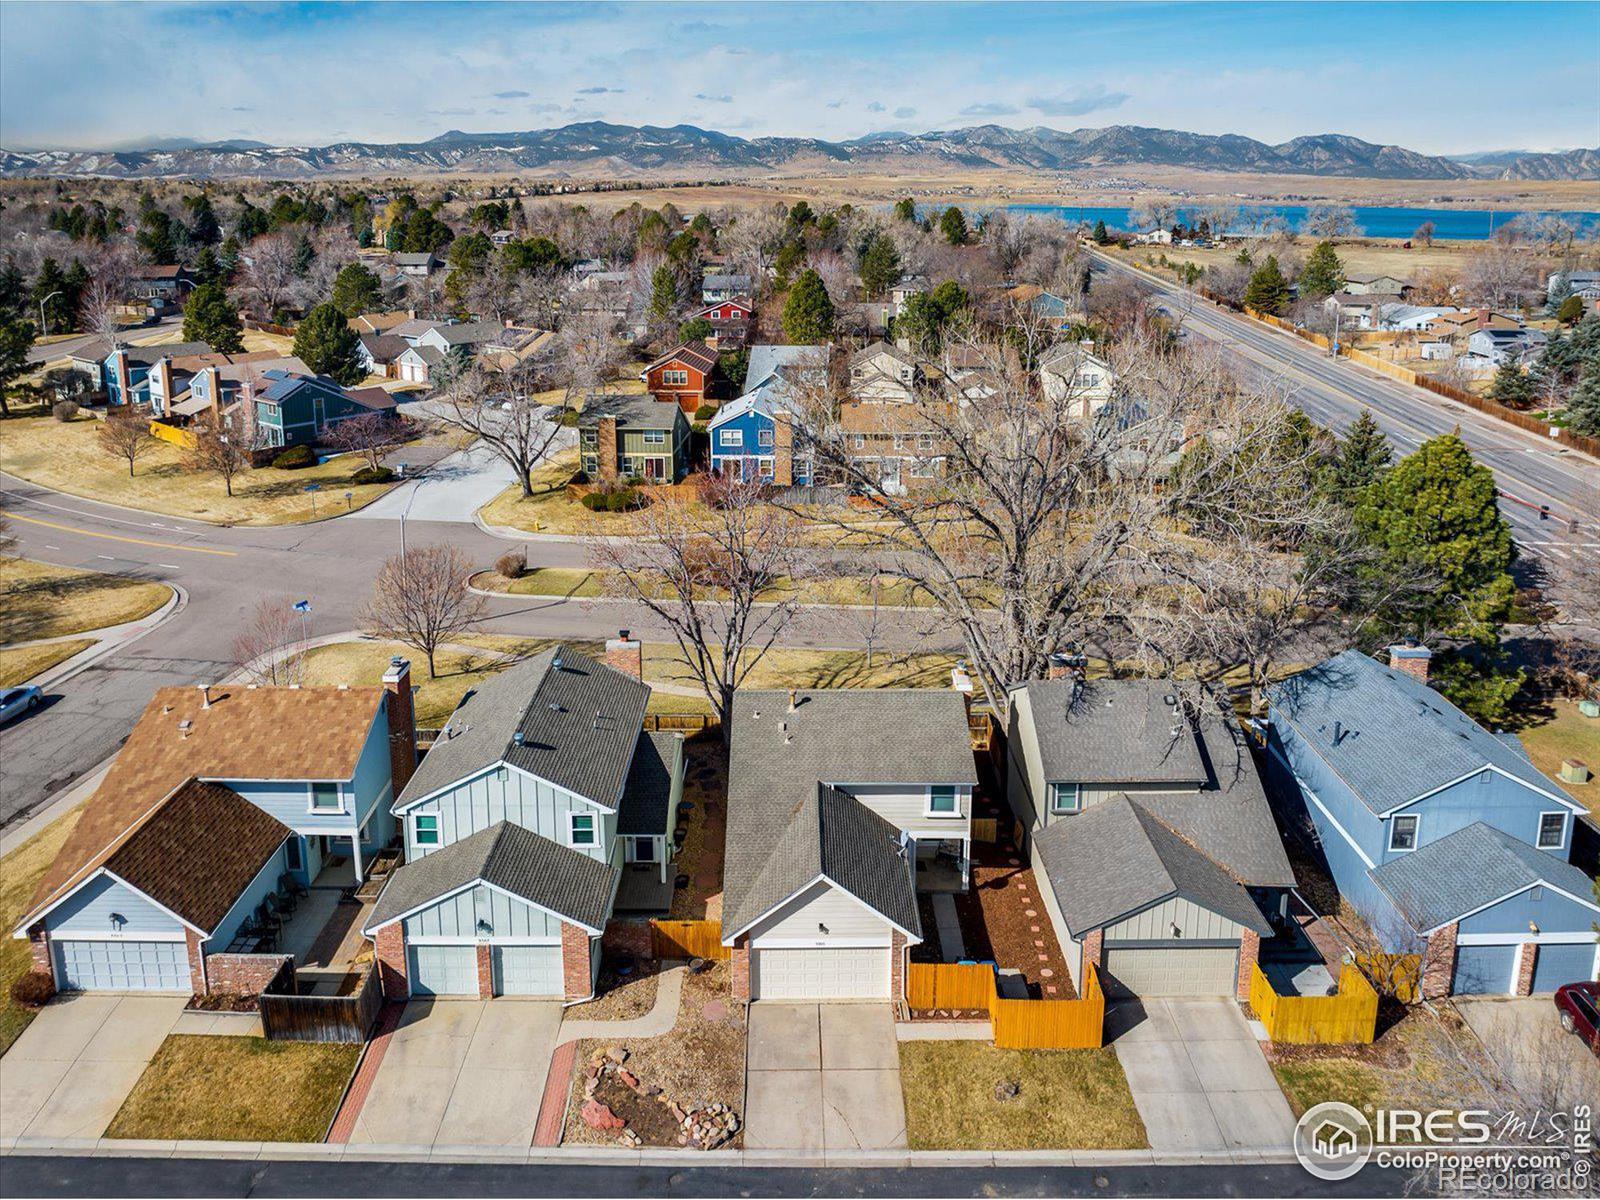 Report Image for 9305 W 87th Place,Arvada, Colorado